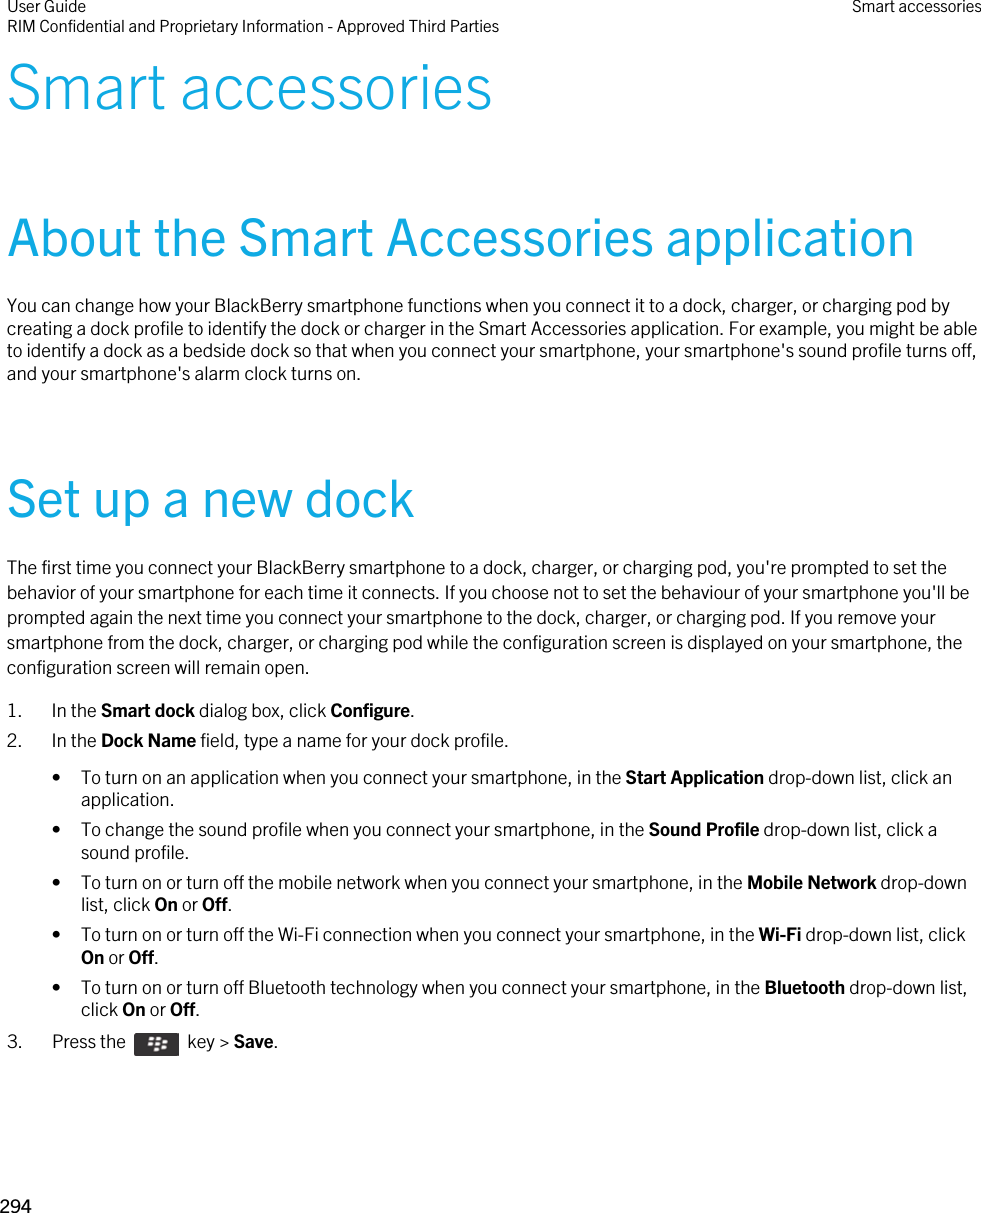 Smart accessoriesAbout the Smart Accessories applicationYou can change how your BlackBerry smartphone functions when you connect it to a dock, charger, or charging pod by creating a dock profile to identify the dock or charger in the Smart Accessories application. For example, you might be able to identify a dock as a bedside dock so that when you connect your smartphone, your smartphone&apos;s sound profile turns off, and your smartphone&apos;s alarm clock turns on.Set up a new dockThe first time you connect your BlackBerry smartphone to a dock, charger, or charging pod, you&apos;re prompted to set the behavior of your smartphone for each time it connects. If you choose not to set the behaviour of your smartphone you&apos;ll be prompted again the next time you connect your smartphone to the dock, charger, or charging pod. If you remove your smartphone from the dock, charger, or charging pod while the configuration screen is displayed on your smartphone, the configuration screen will remain open.1. In the Smart dock dialog box, click Configure.2. In the Dock Name field, type a name for your dock profile.• To turn on an application when you connect your smartphone, in the Start Application drop-down list, click an application.• To change the sound profile when you connect your smartphone, in the Sound Profile drop-down list, click a sound profile.• To turn on or turn off the mobile network when you connect your smartphone, in the Mobile Network drop-down list, click On or Off.• To turn on or turn off the Wi-Fi connection when you connect your smartphone, in the Wi-Fi drop-down list, click On or Off.• To turn on or turn off Bluetooth technology when you connect your smartphone, in the Bluetooth drop-down list, click On or Off.3.  Press the    key &gt; Save. User GuideRIM Confidential and Proprietary Information - Approved Third Parties Smart accessories294 